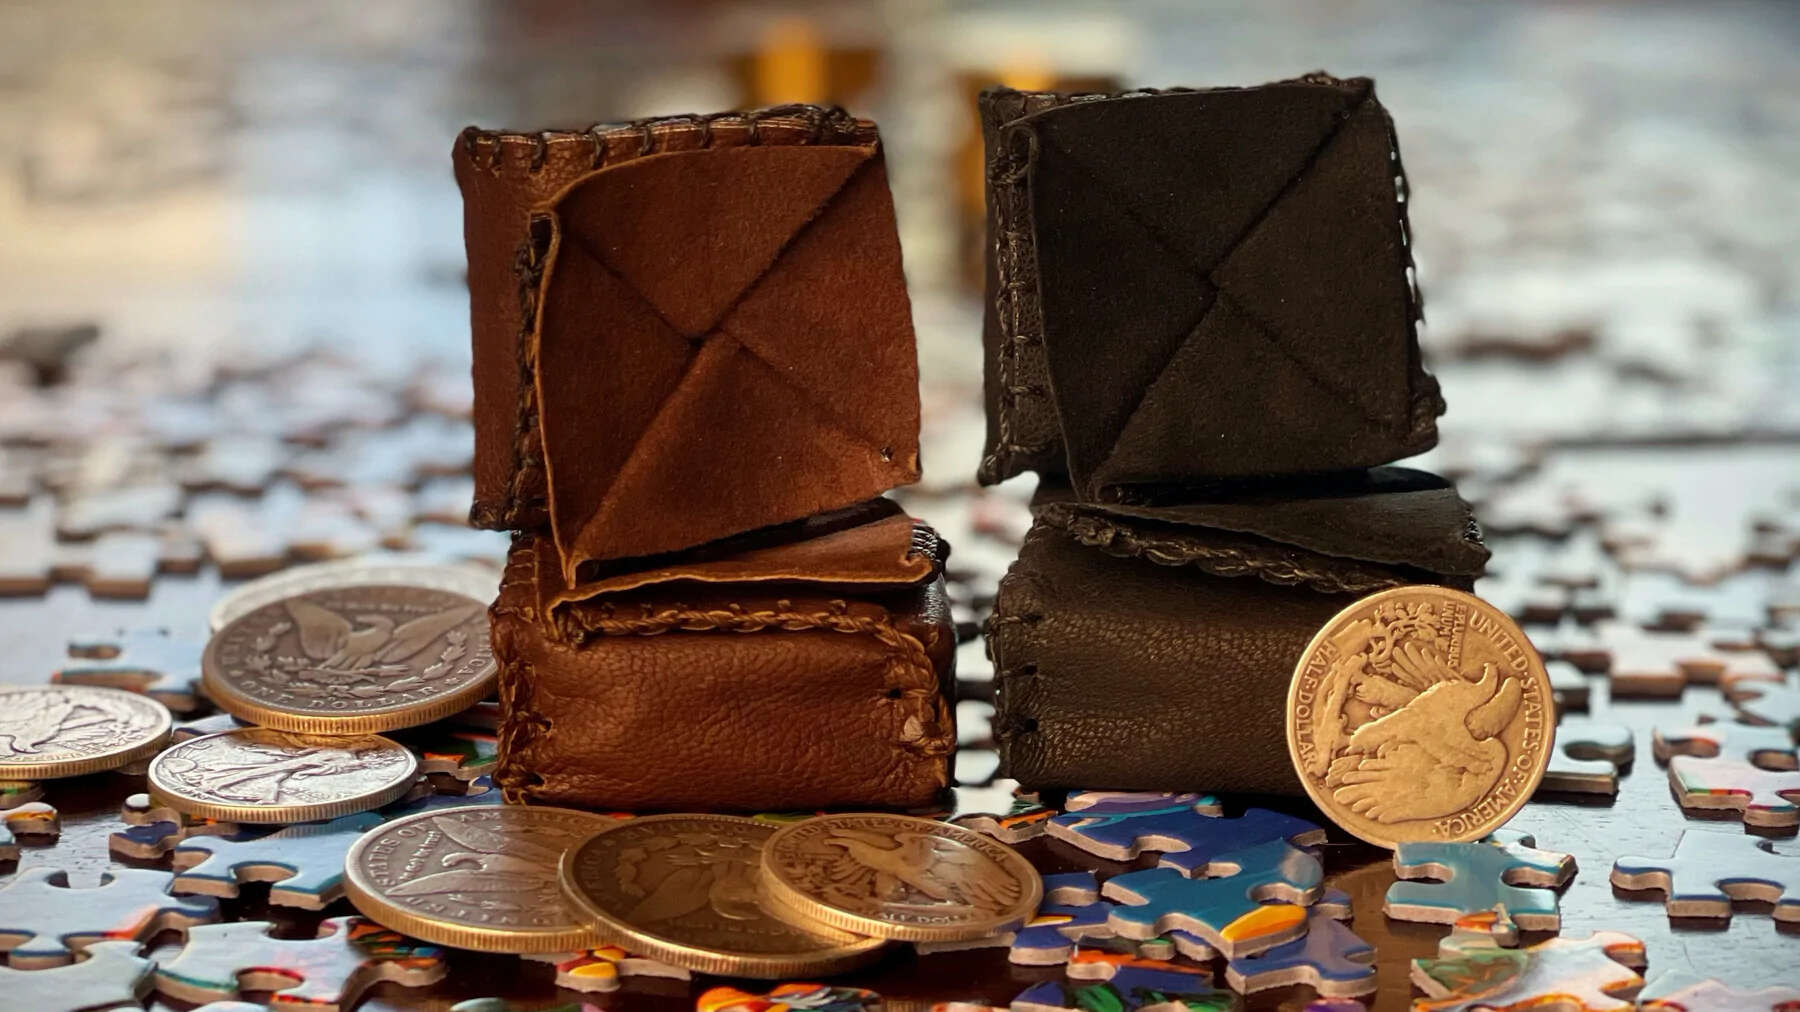 Coin Box Wallet by Jeff Copeland brown and black next to coins on jigsaw pieces